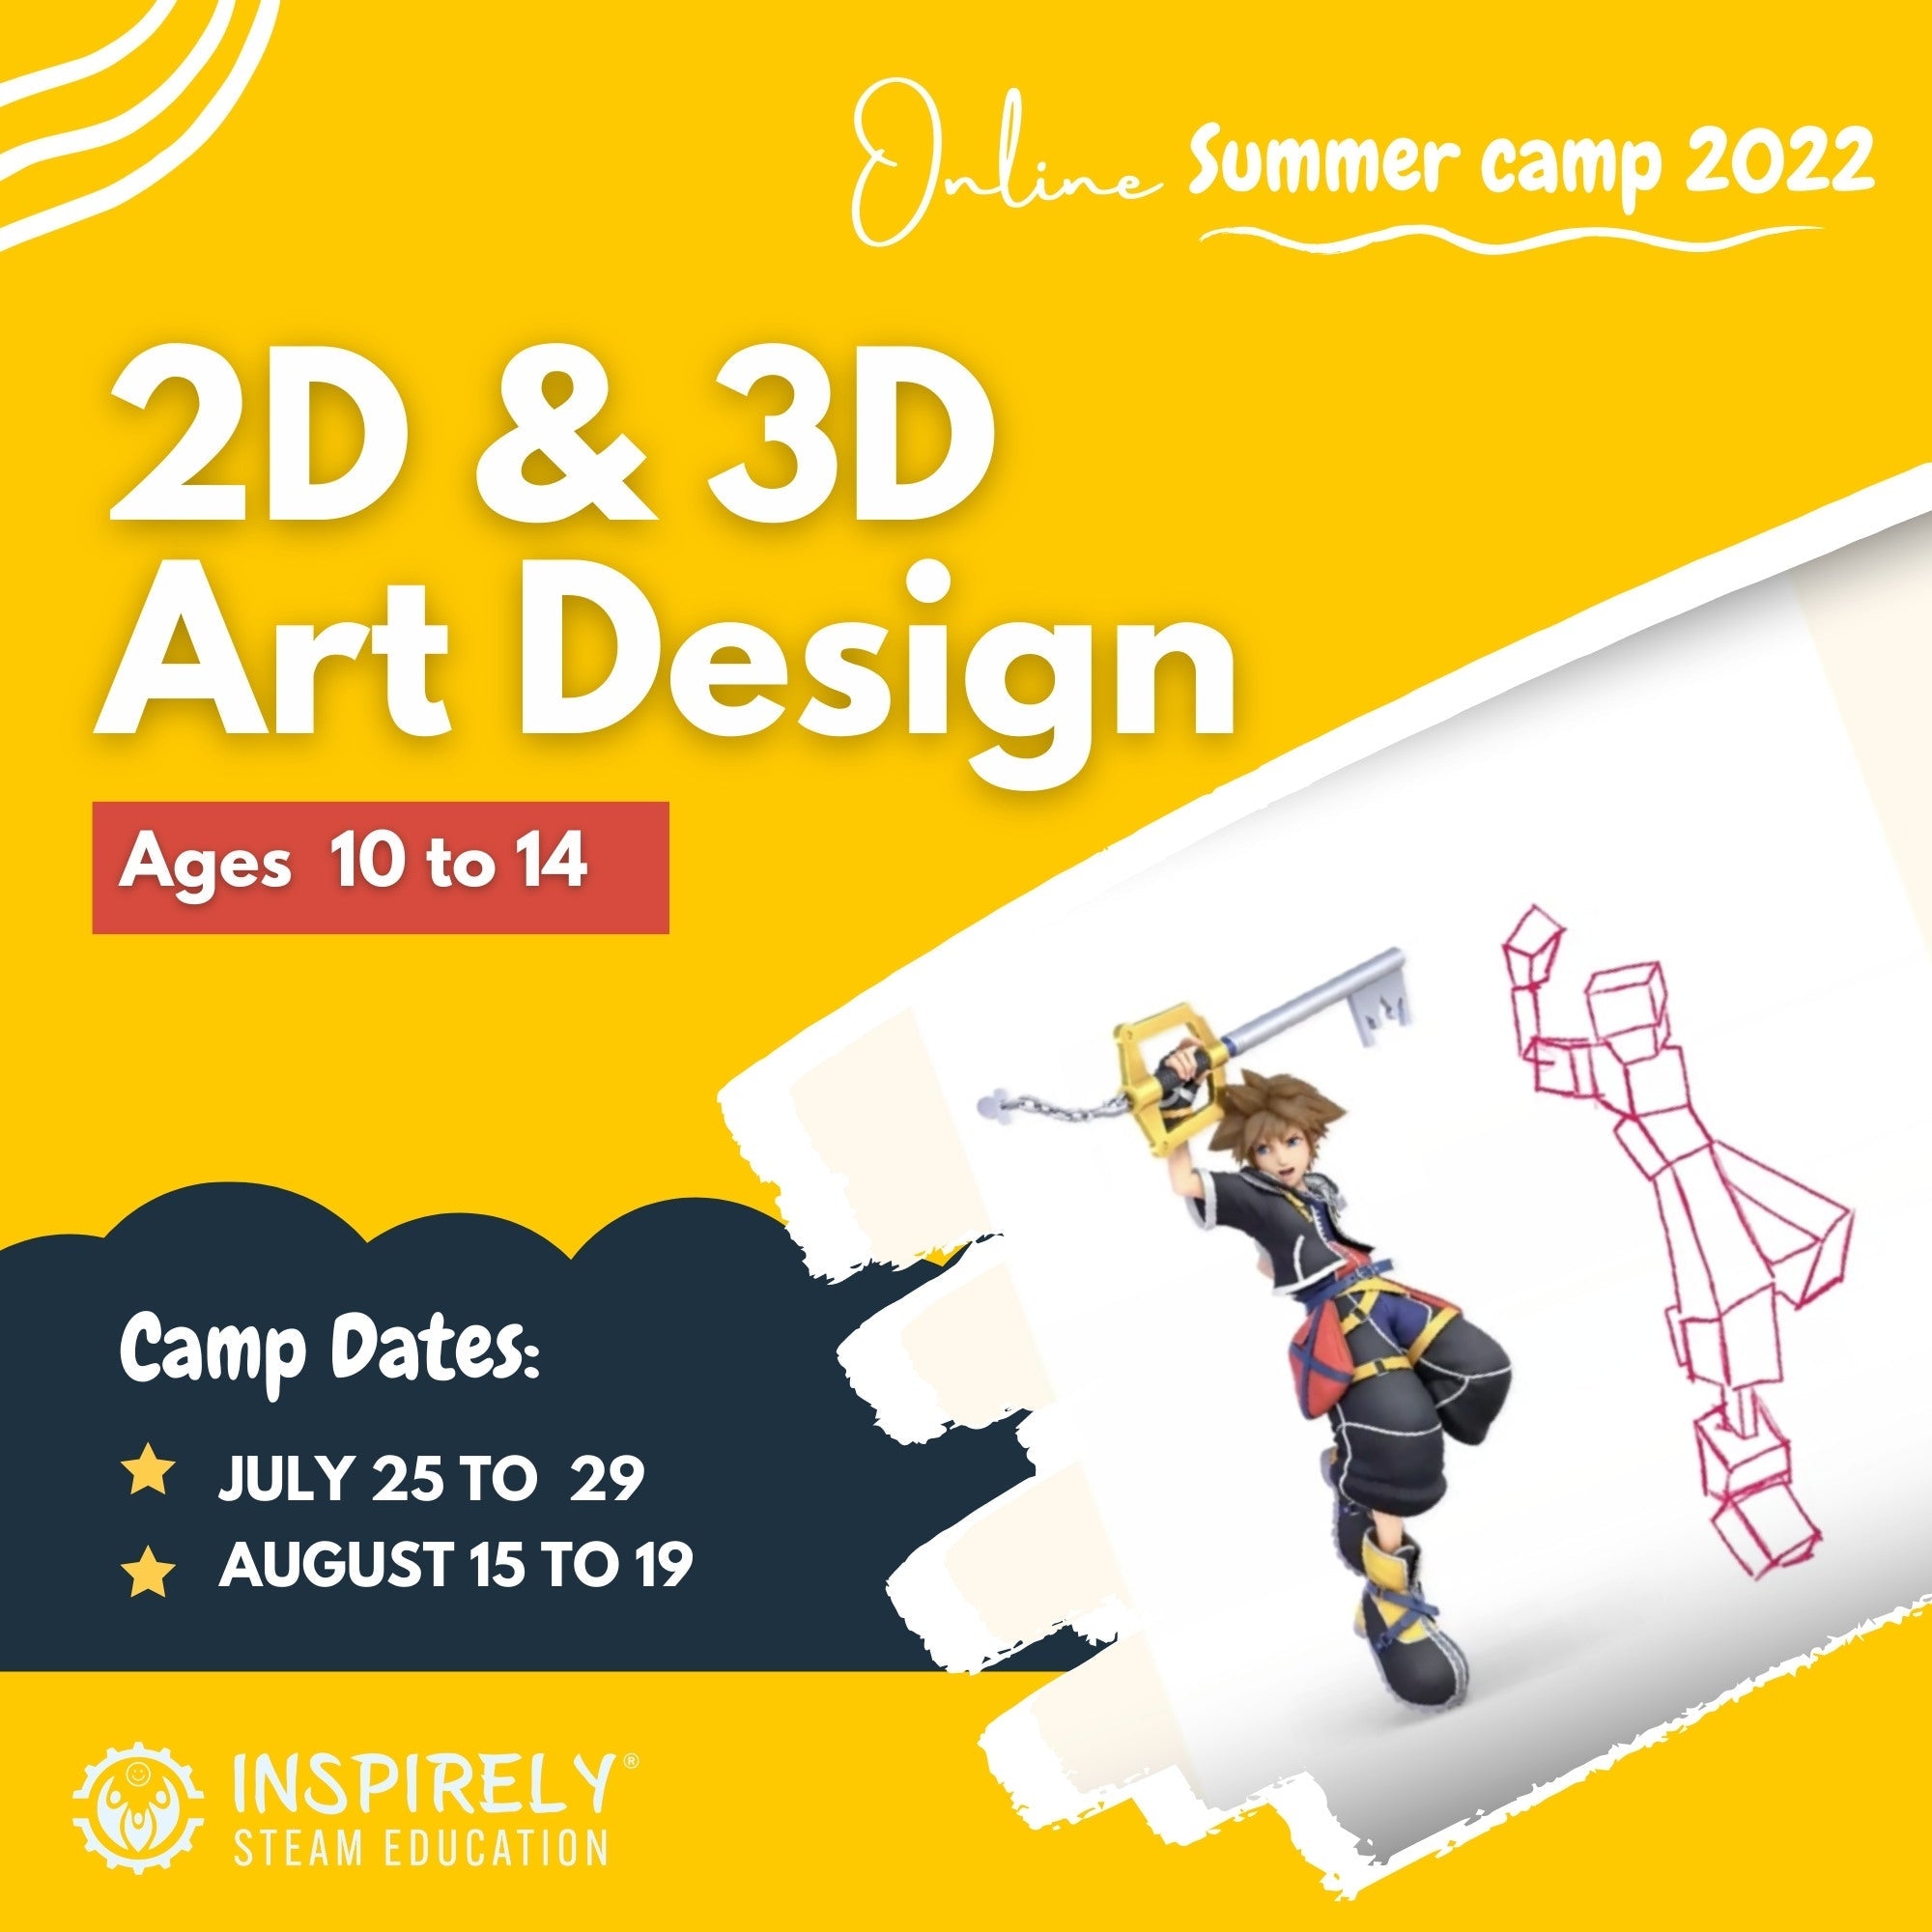 2D & 3D Art design | Online Summer Camp 2022 | Children ages 10 to 14 years - Inspirely Education